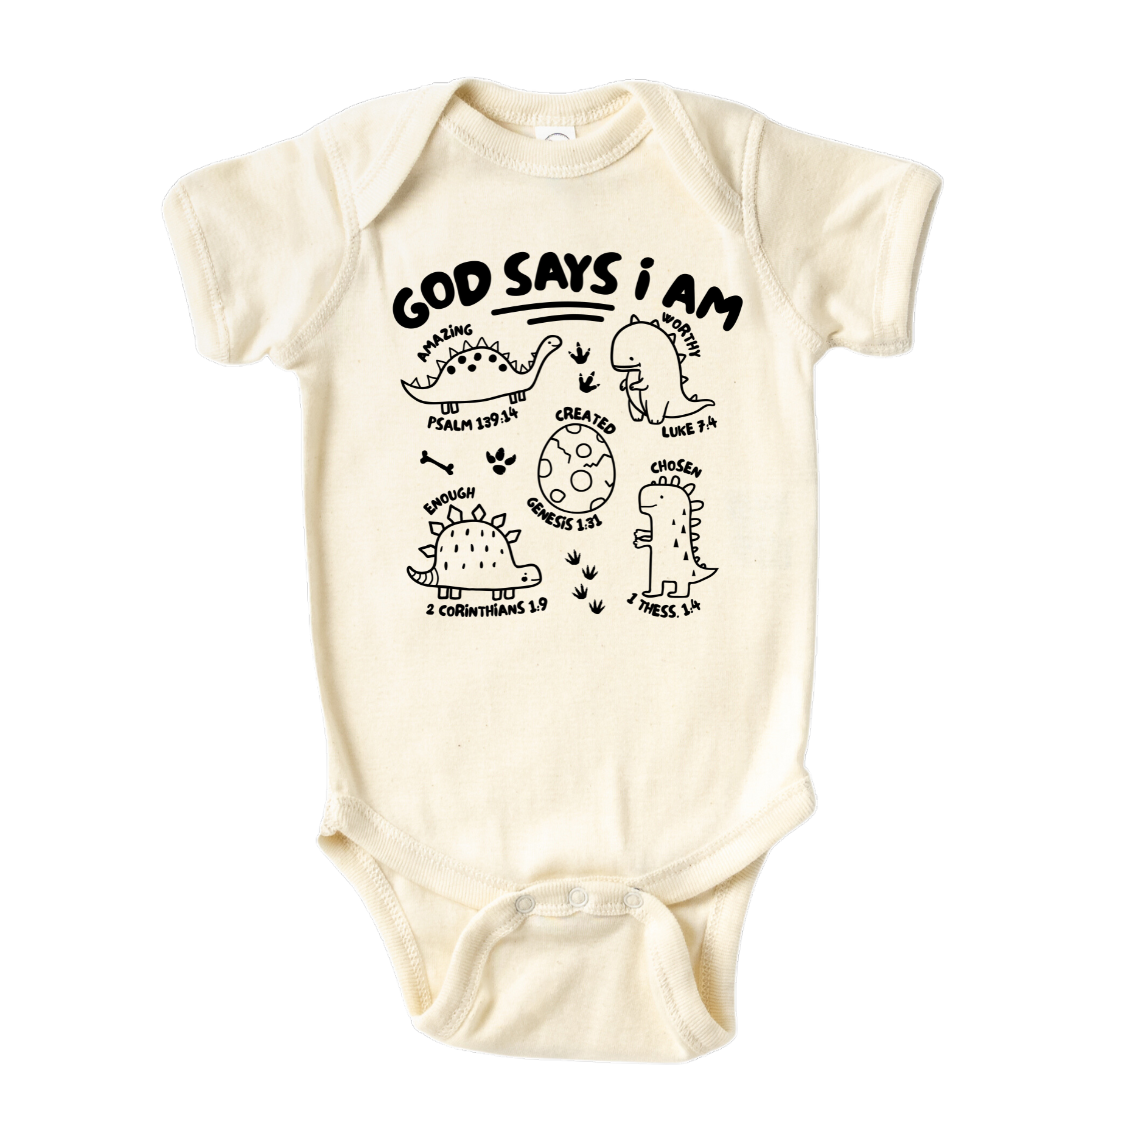 funny baby clothes newborn onesies unisex newborn boy onesies funny onesies for babies baby essentials baby boy clothes newborn essentials must haves